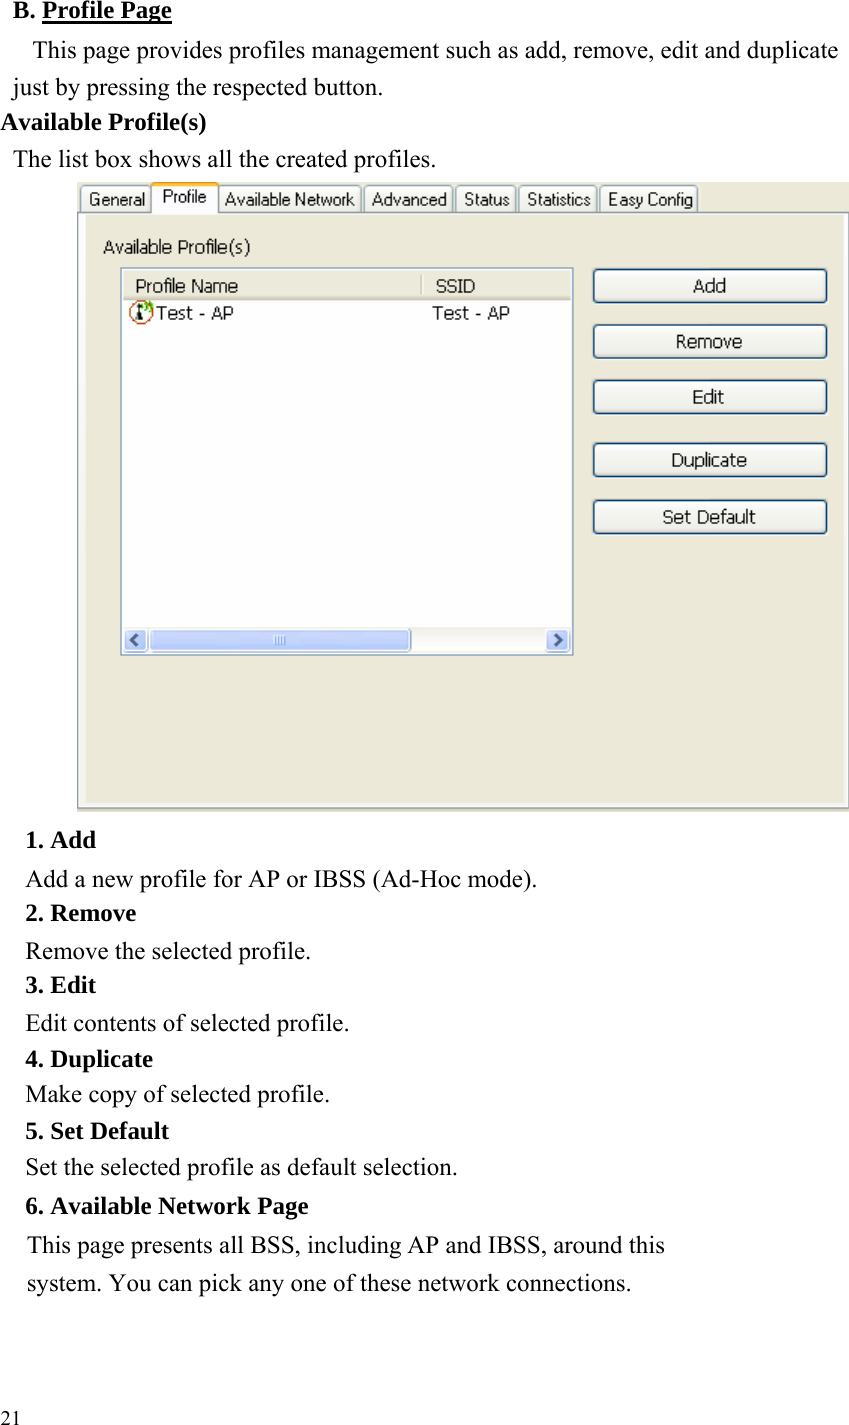    B. Profile PageThis page provides profiles management such as add, remove, edit and duplicate just by pressing the respected button.     Available Profile(s) The list box shows all the created profiles.                                1. Add Add a new profile for AP or IBSS (Ad-Hoc mode).     2. Remove Remove the selected profile. 3. Edit Edit contents of selected profile. 4. Duplicate Make copy of selected profile.     5. Set Default Set the selected profile as default selection.     6. Available Network Page This page presents all BSS, including AP and IBSS, around this system. You can pick any one of these network connections.         21 